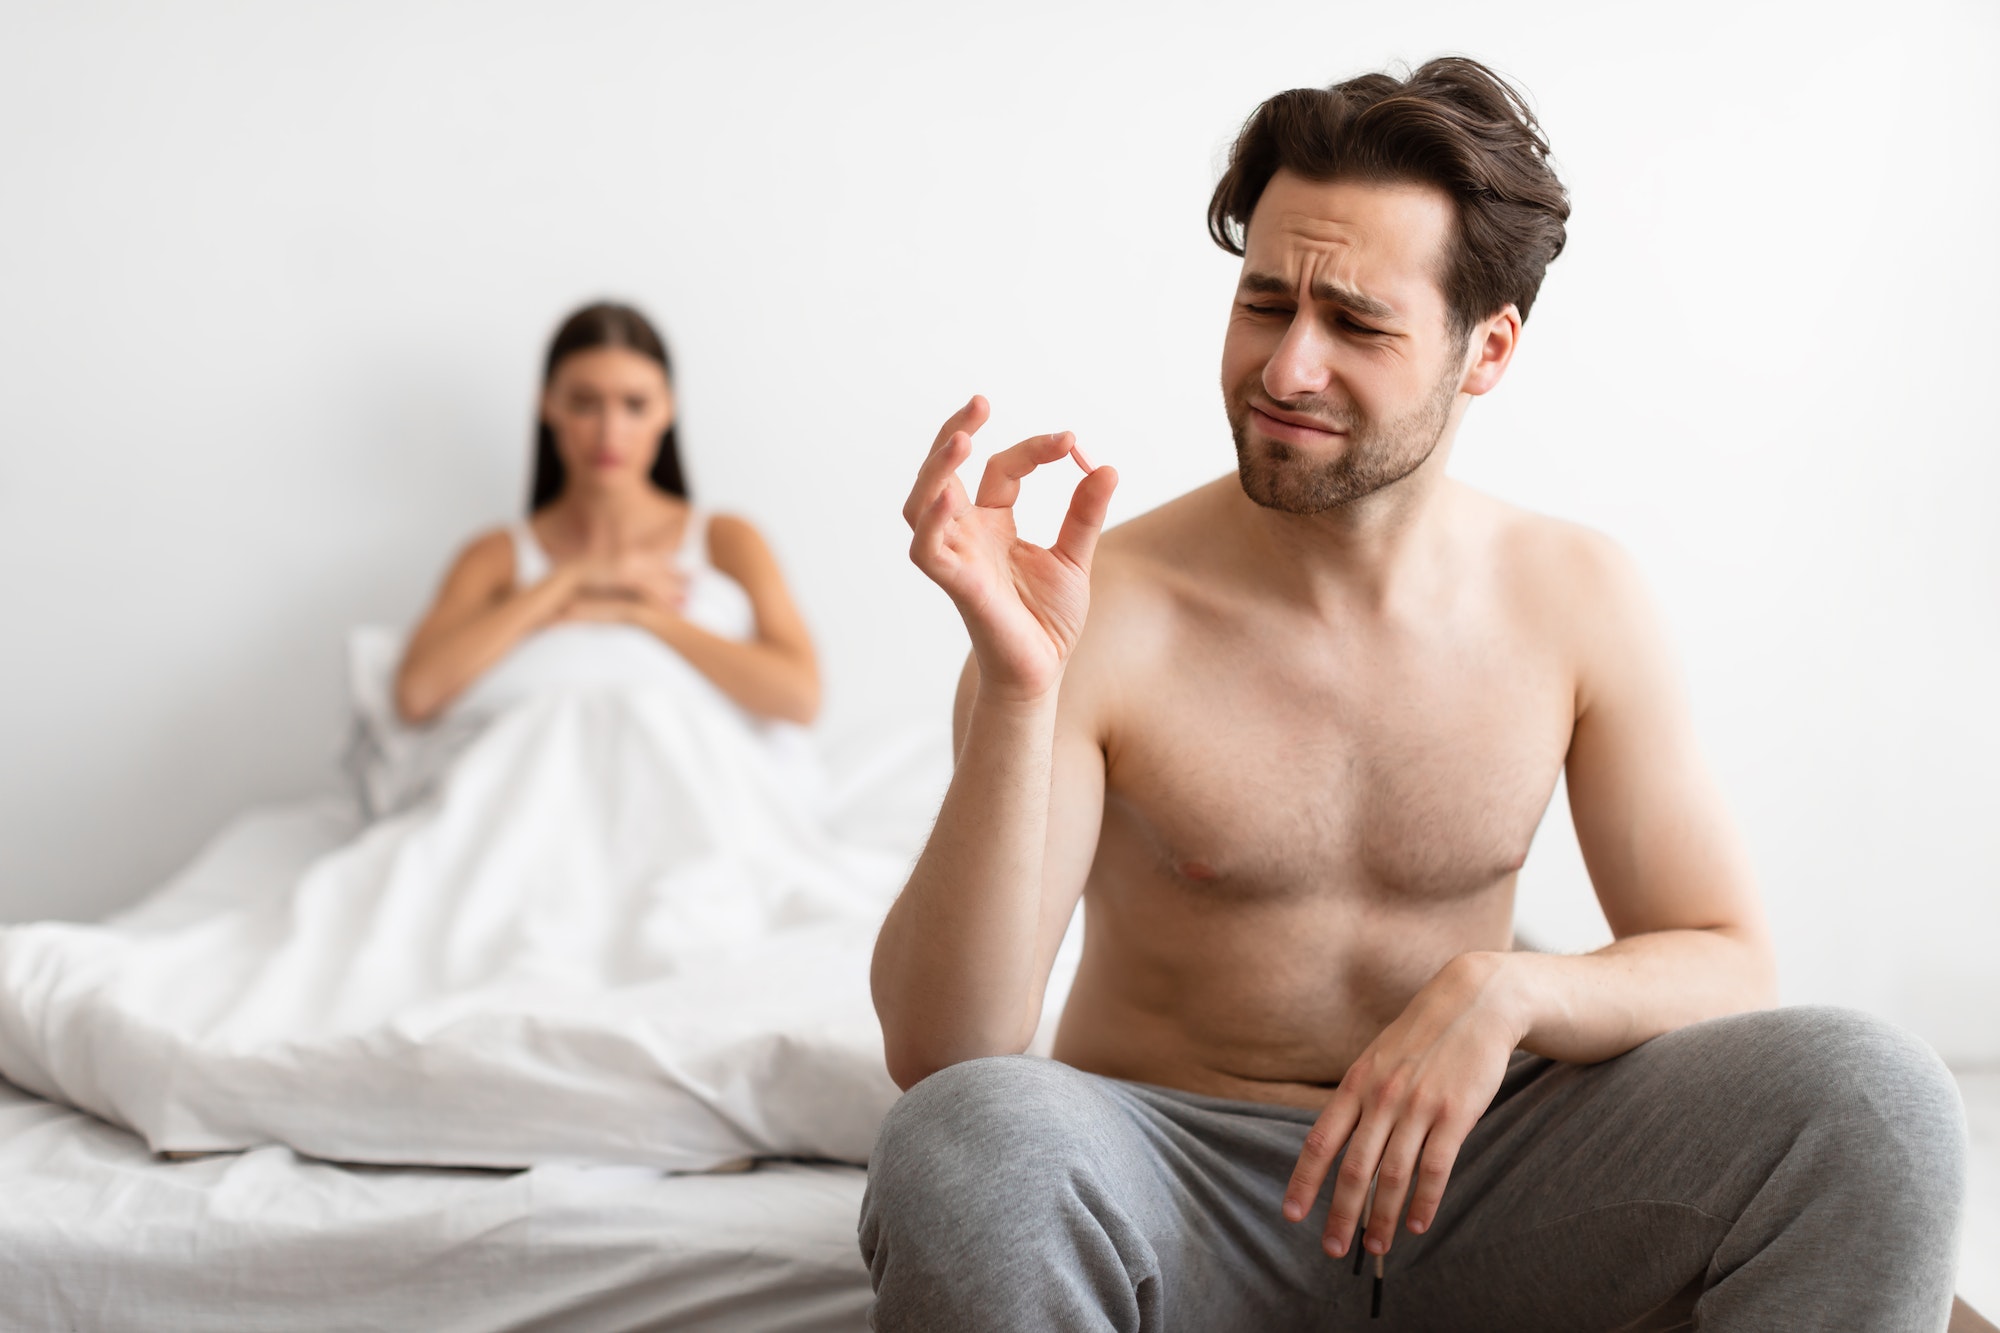 Unhappy Man Holding Potency Pill Before Sex In Bedroom Indoors